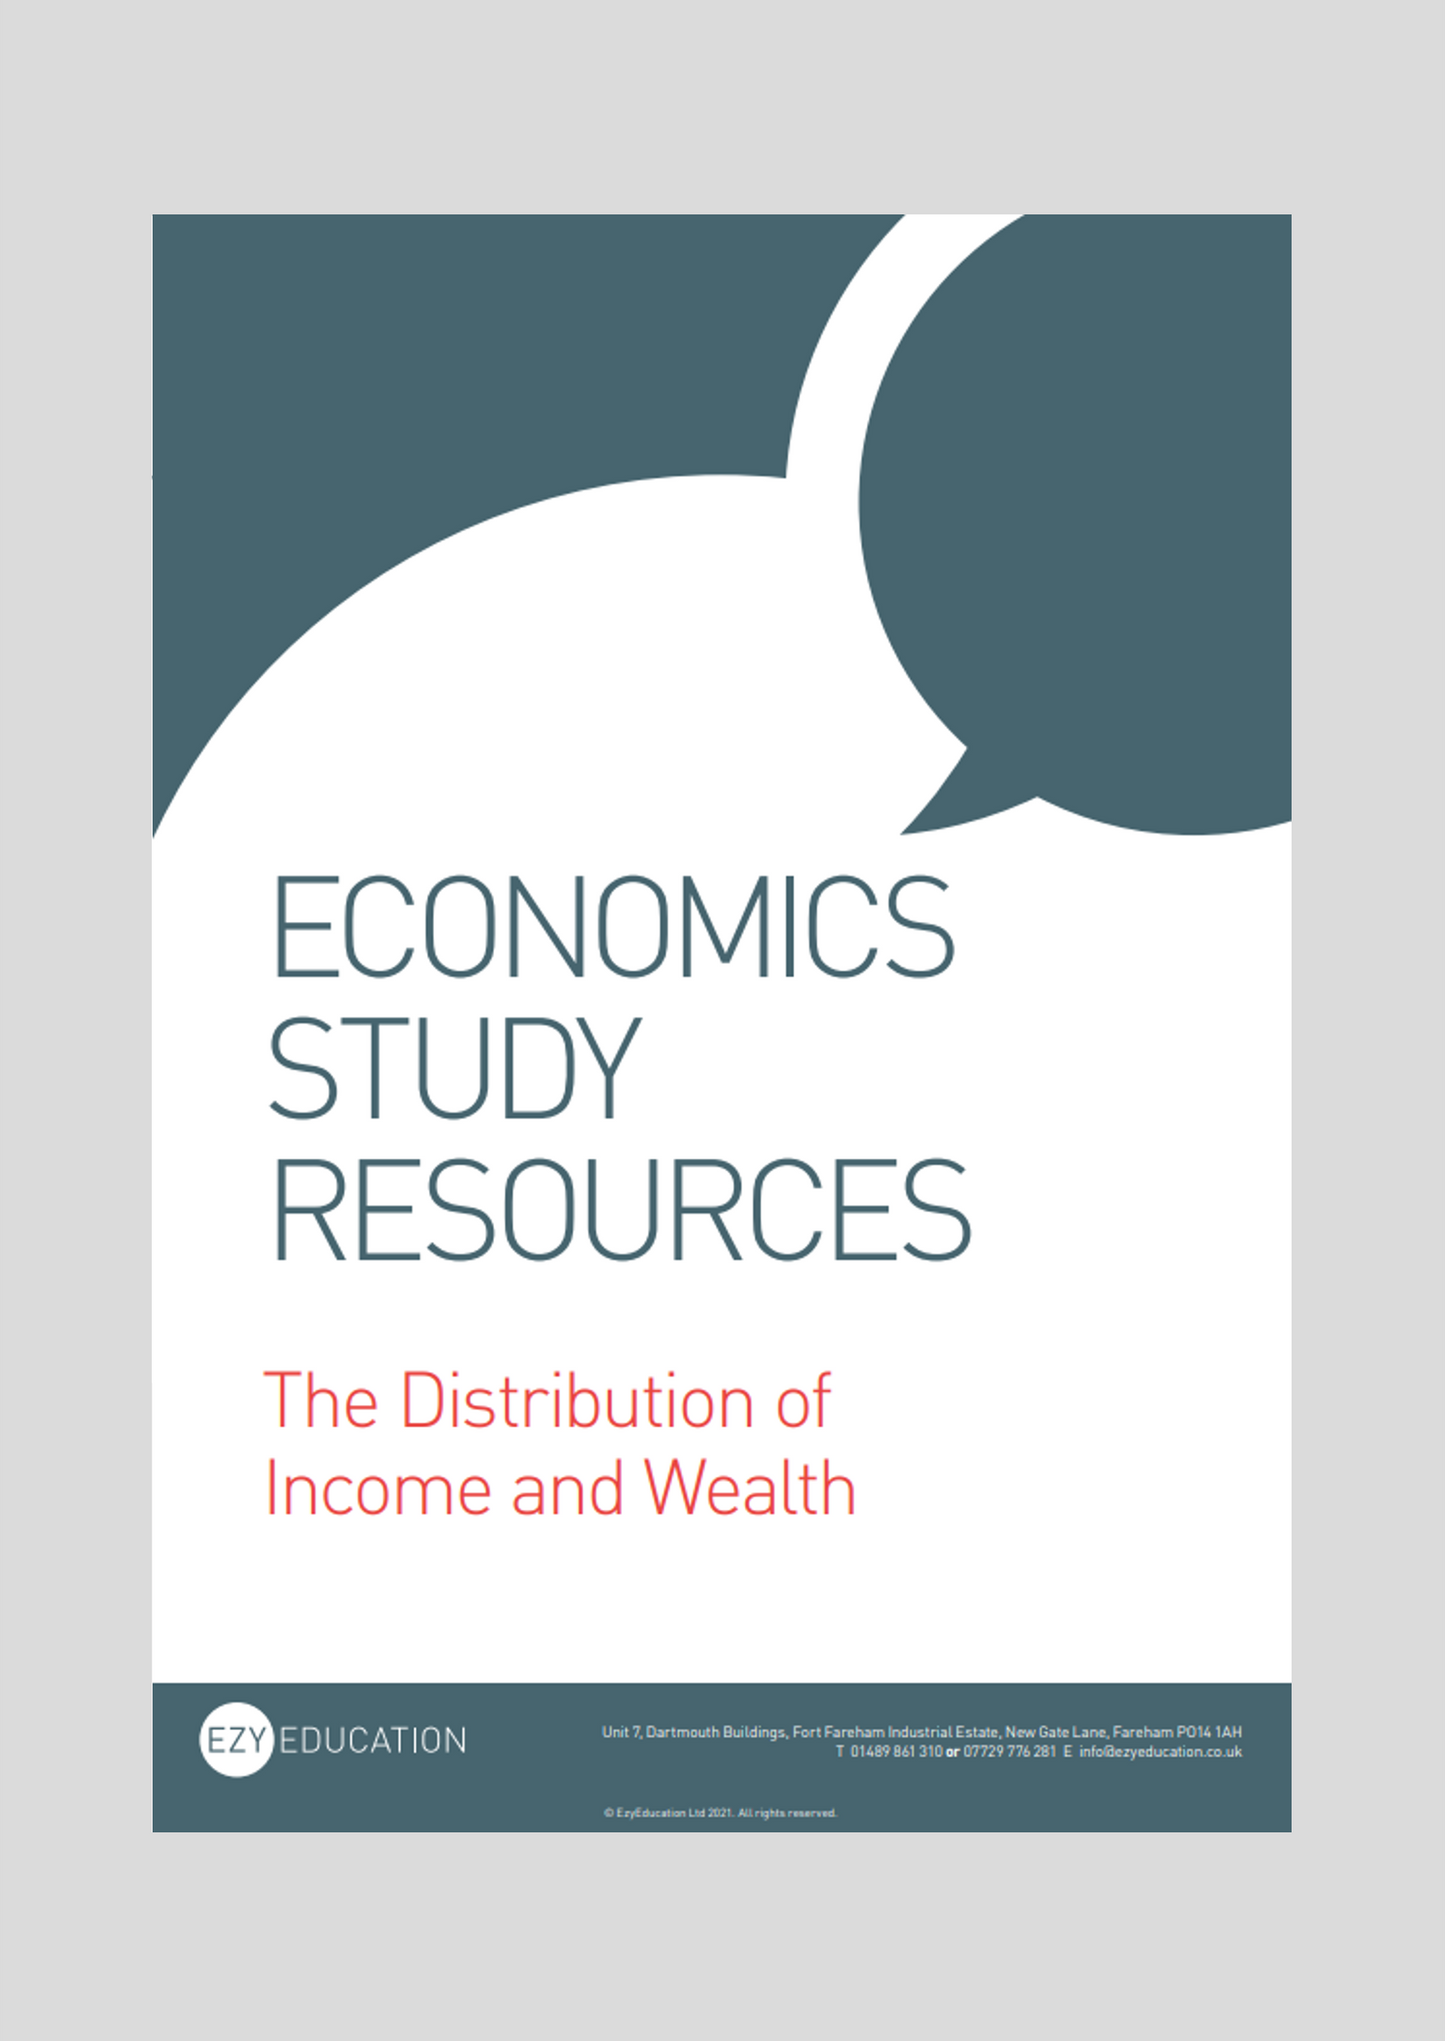 A-Level Microeconomics Study Guide - Module 11: The Distribution of Income and Wealth